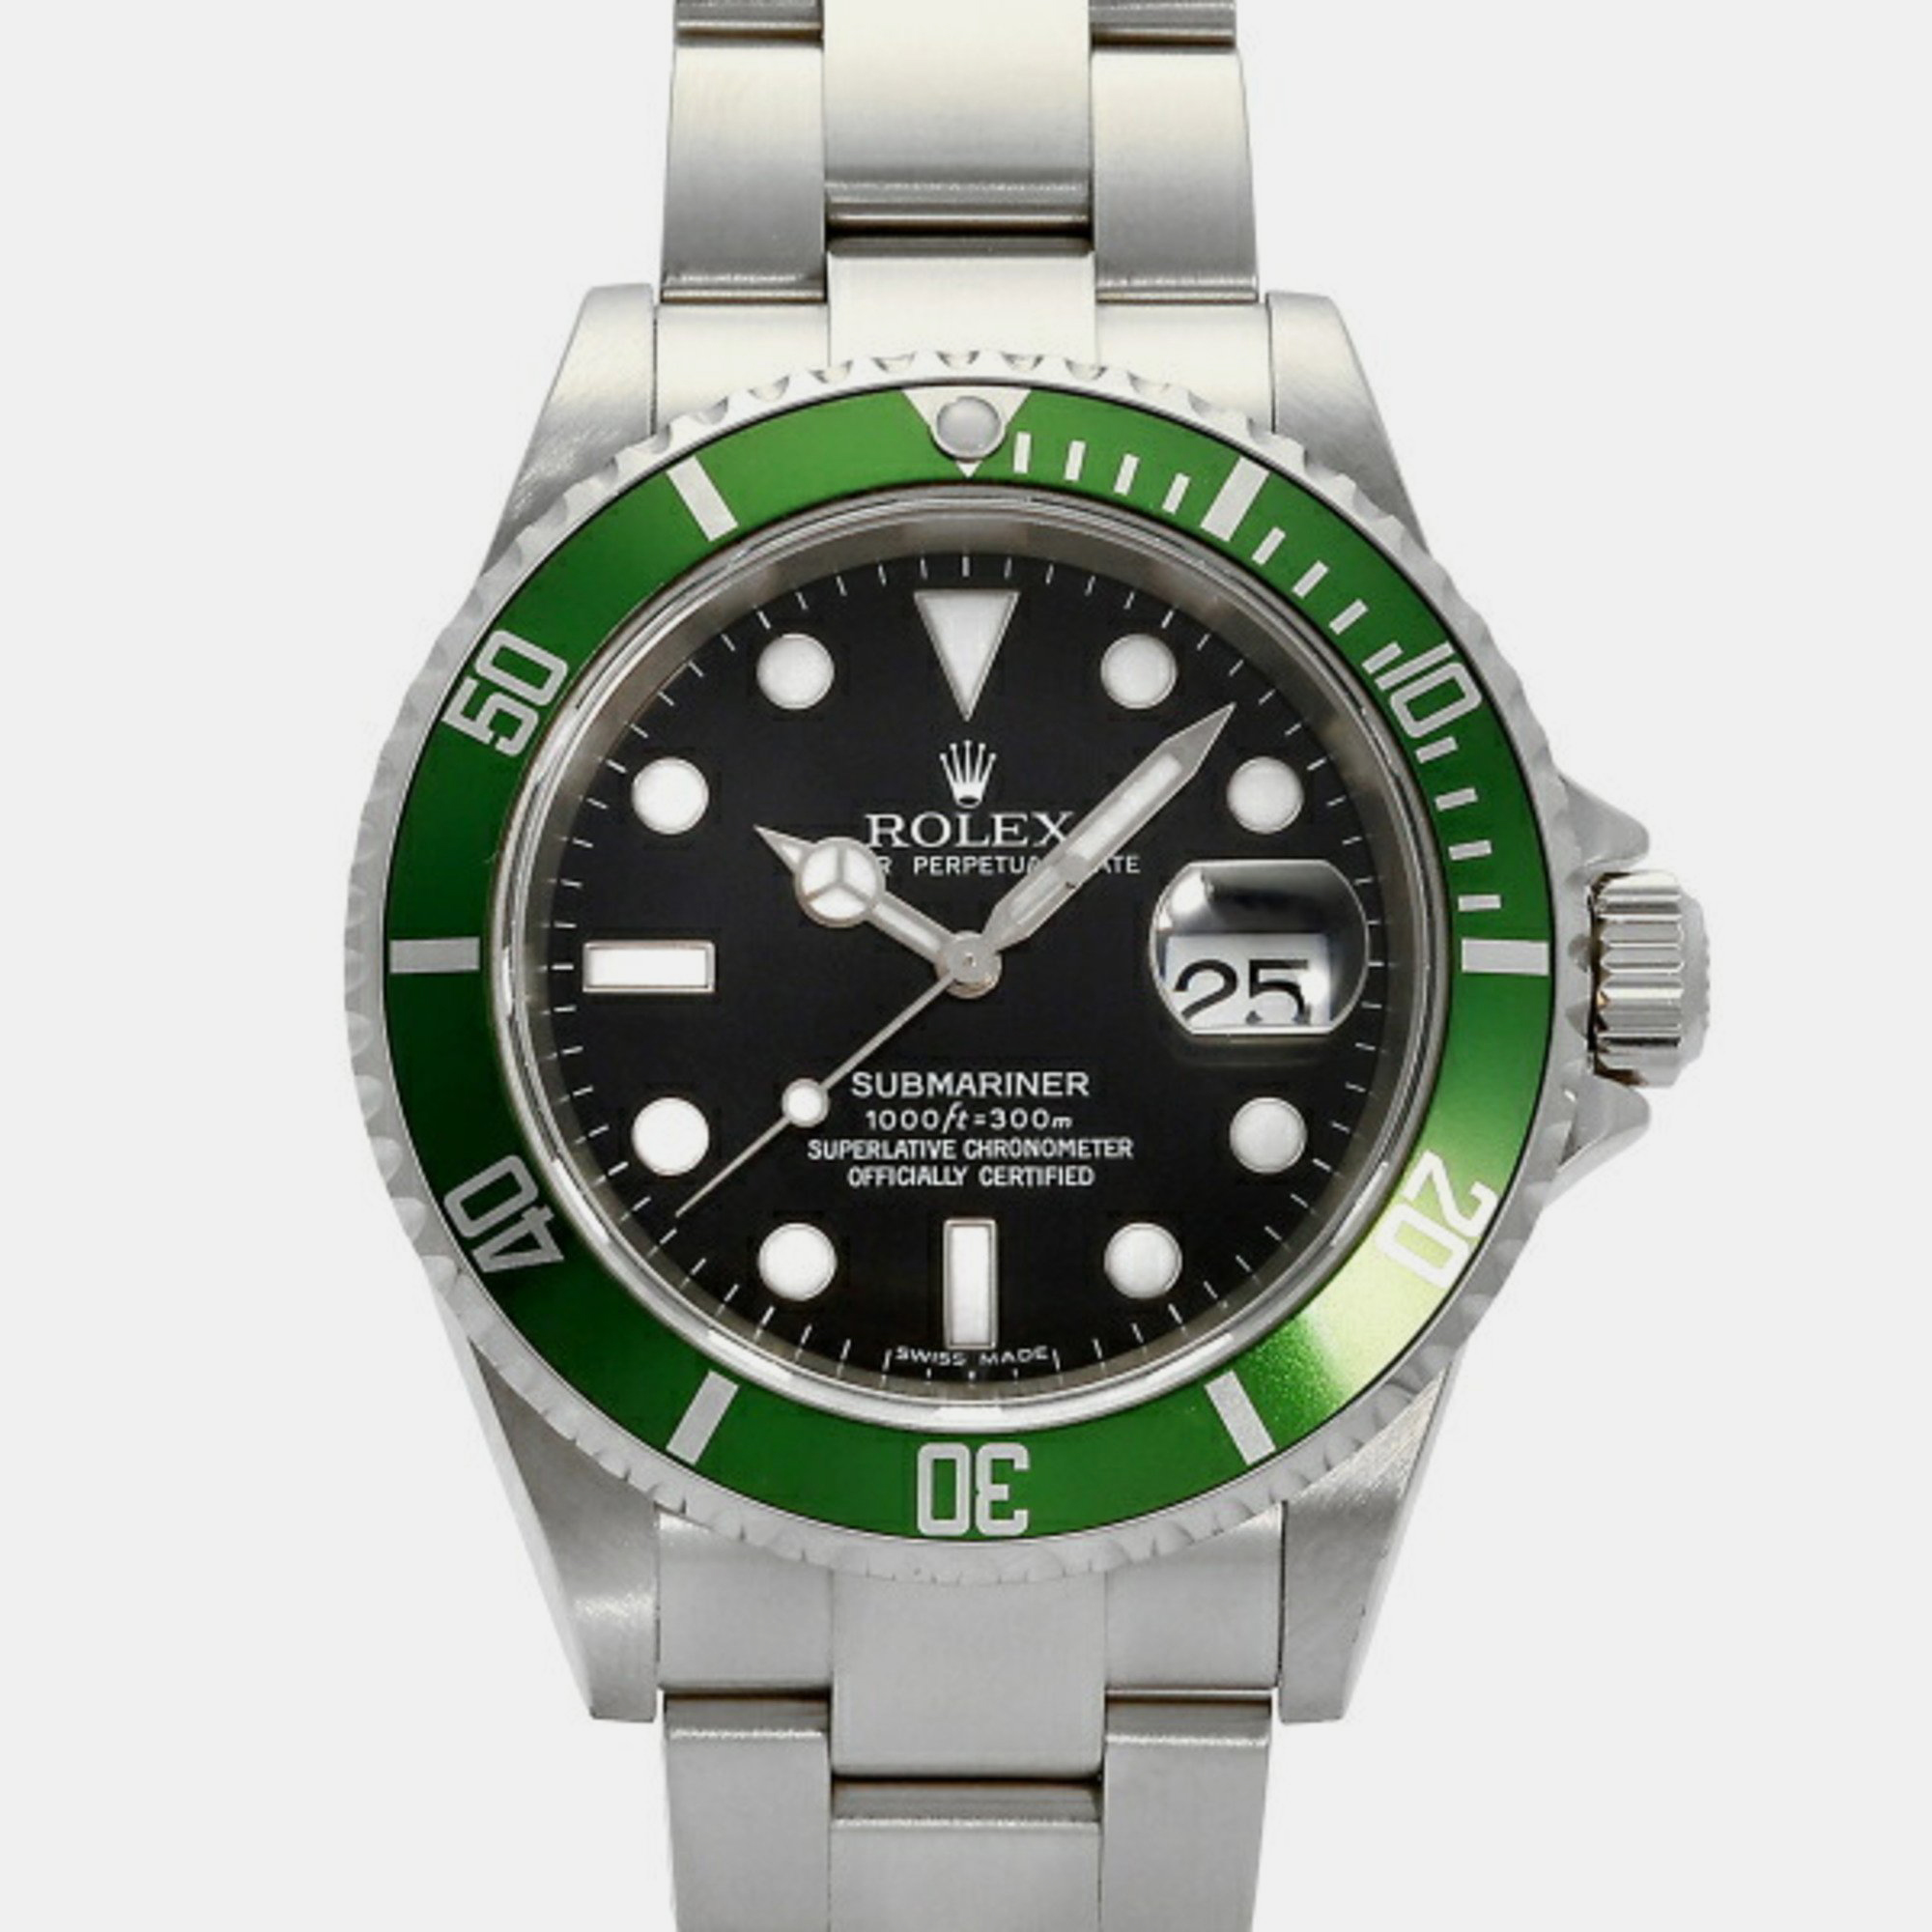 Rolex Black Stainless Steel And Ceramic Submariner 16610LV Automatic Men's Wristwatch 40 Mm